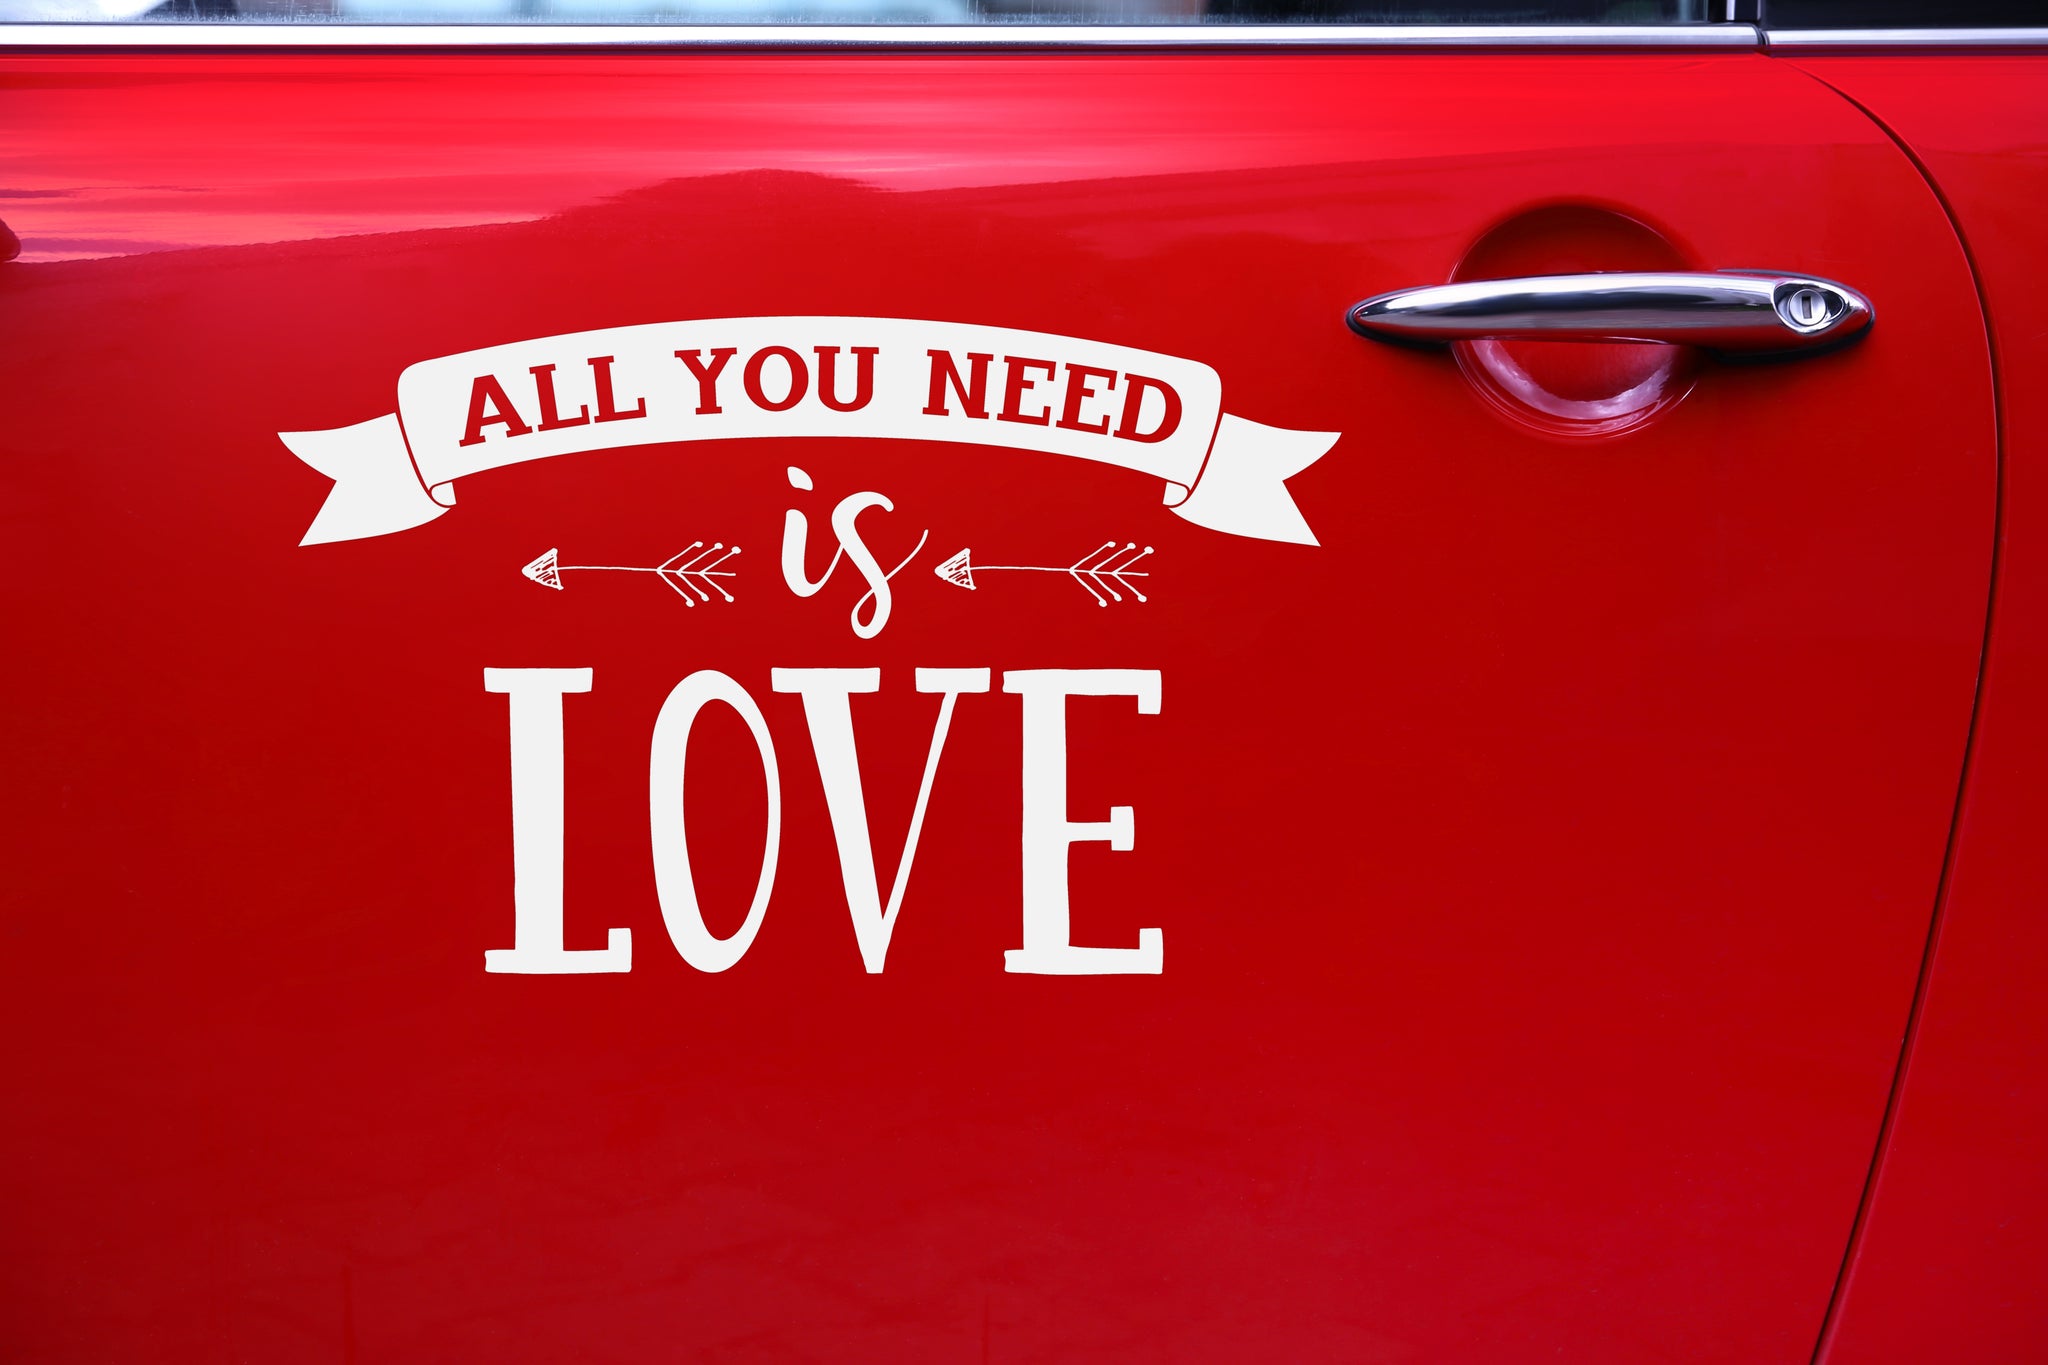 Adhesivas Coche "All you Need is LOVE"